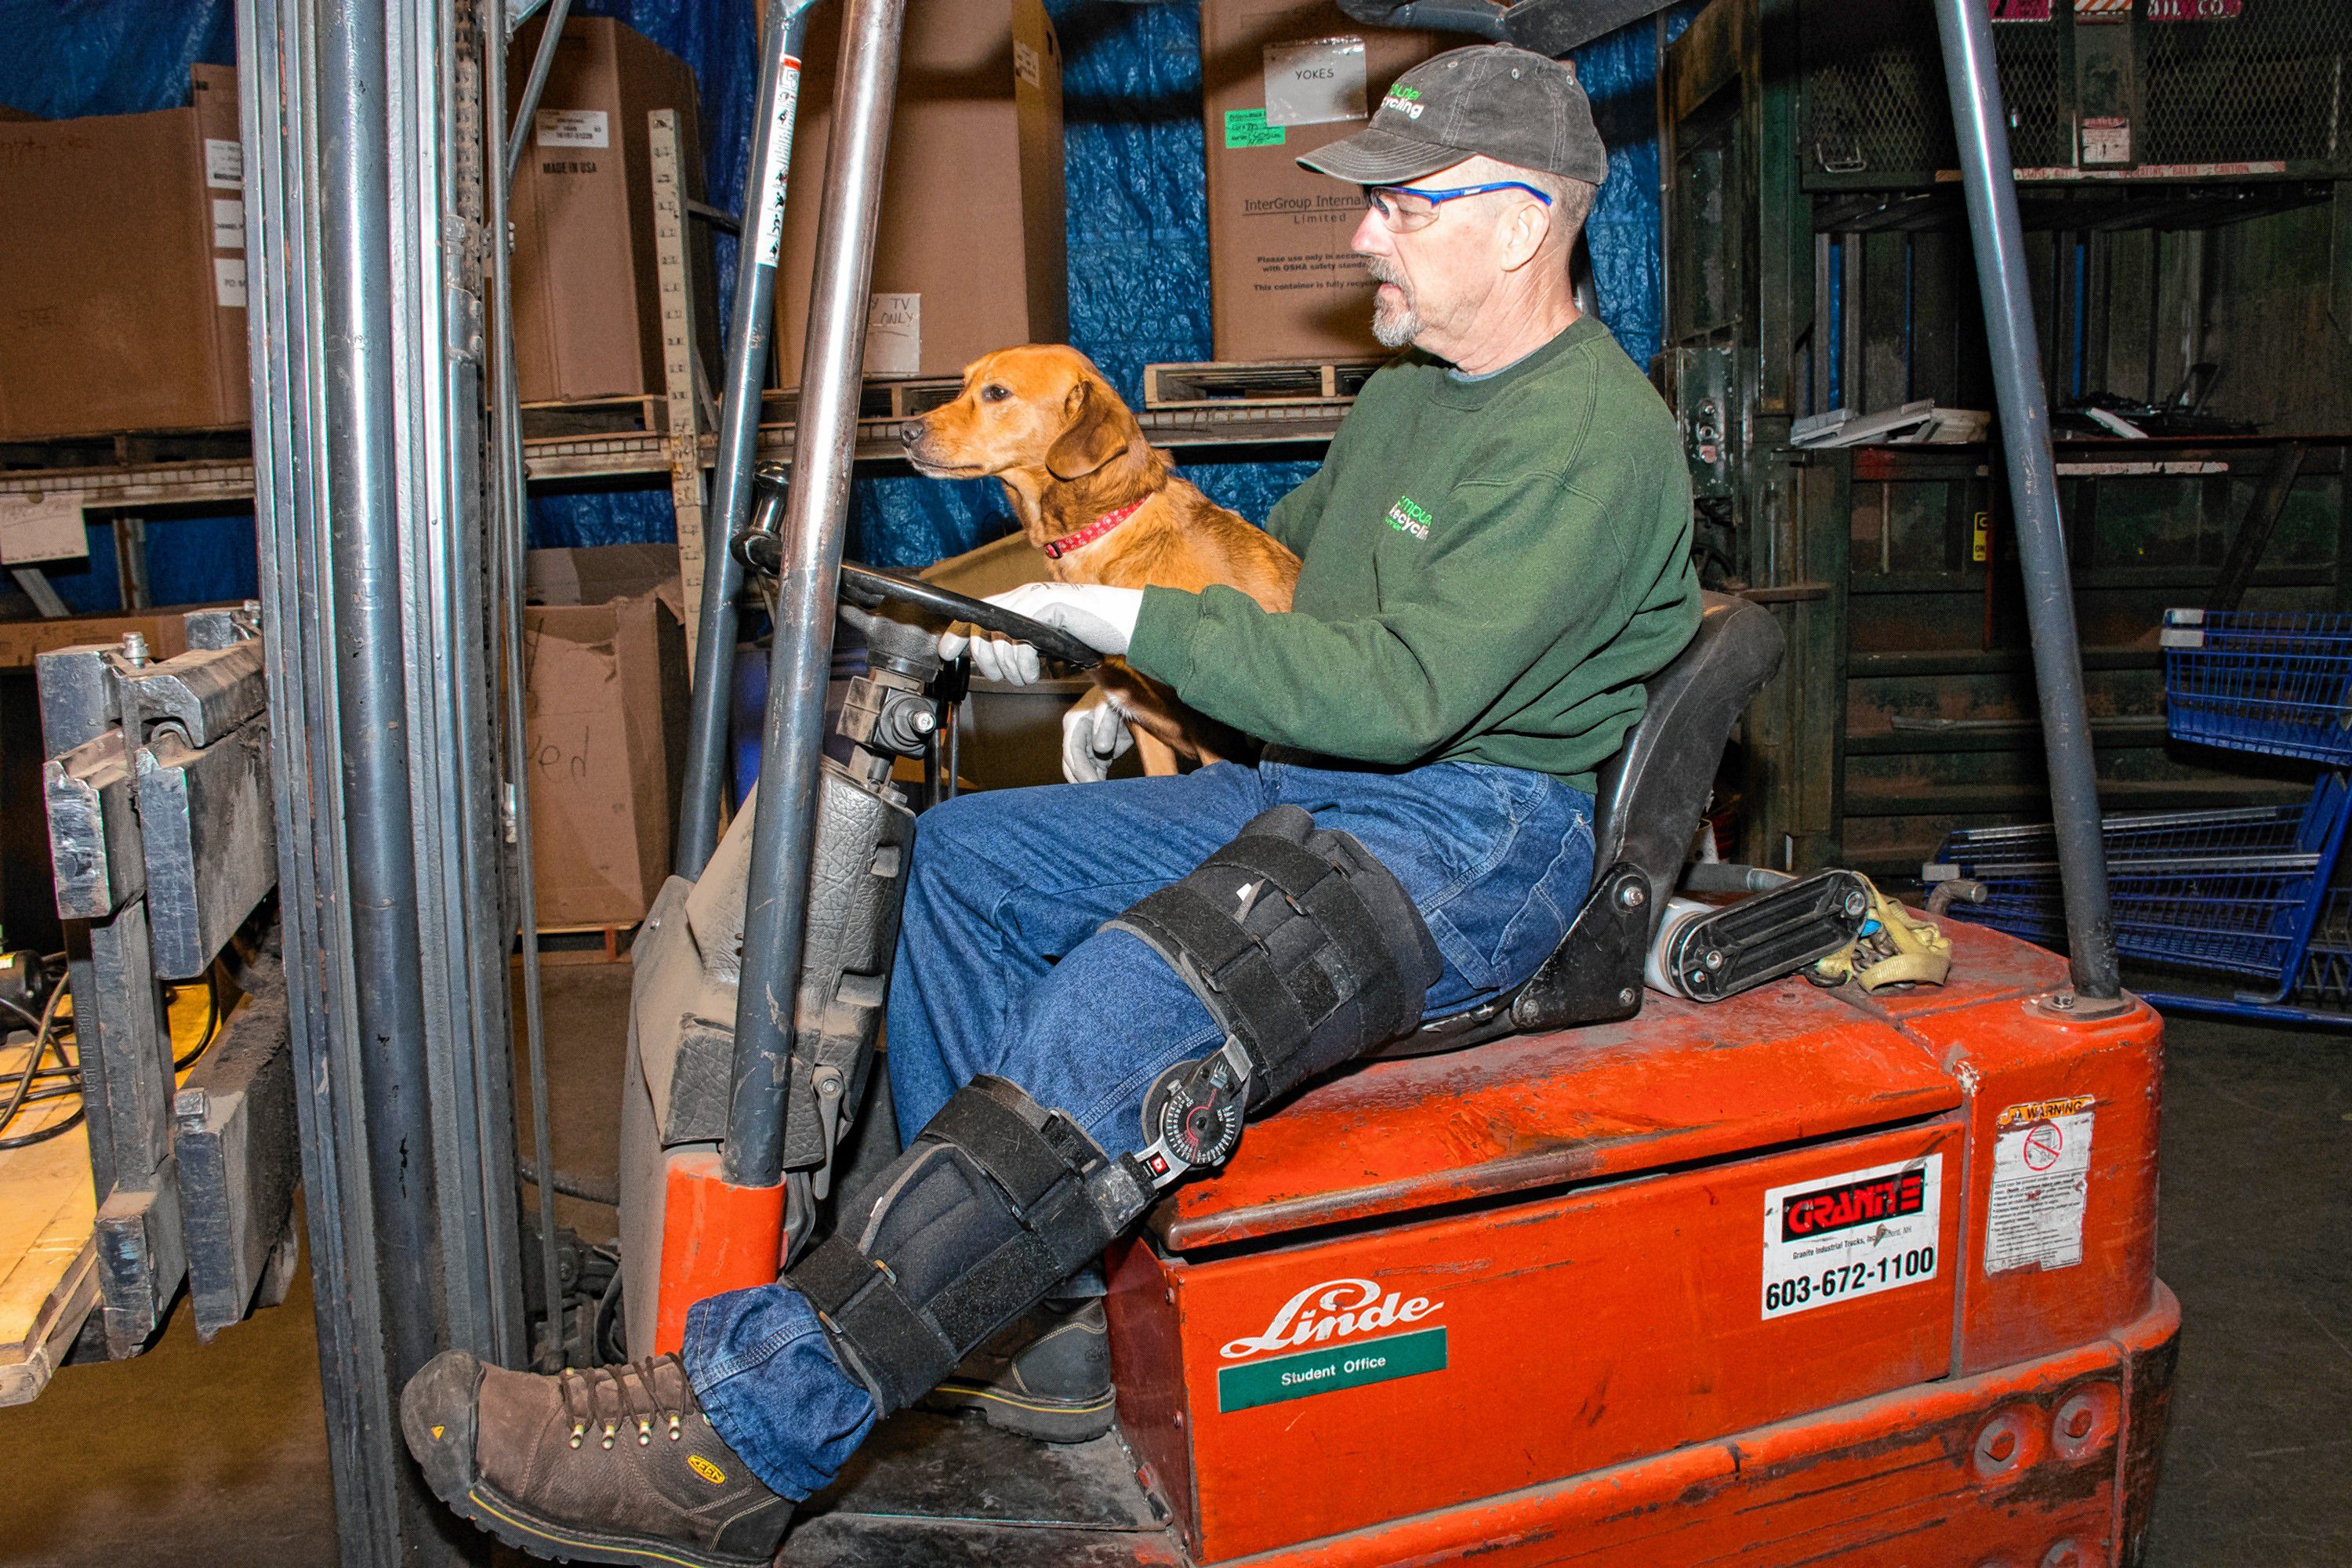 Penny, Ken and Joyce's dog, helps Ken with the forklift moving things around in the warehouse. Nancy Nutile-McMenemy photograph